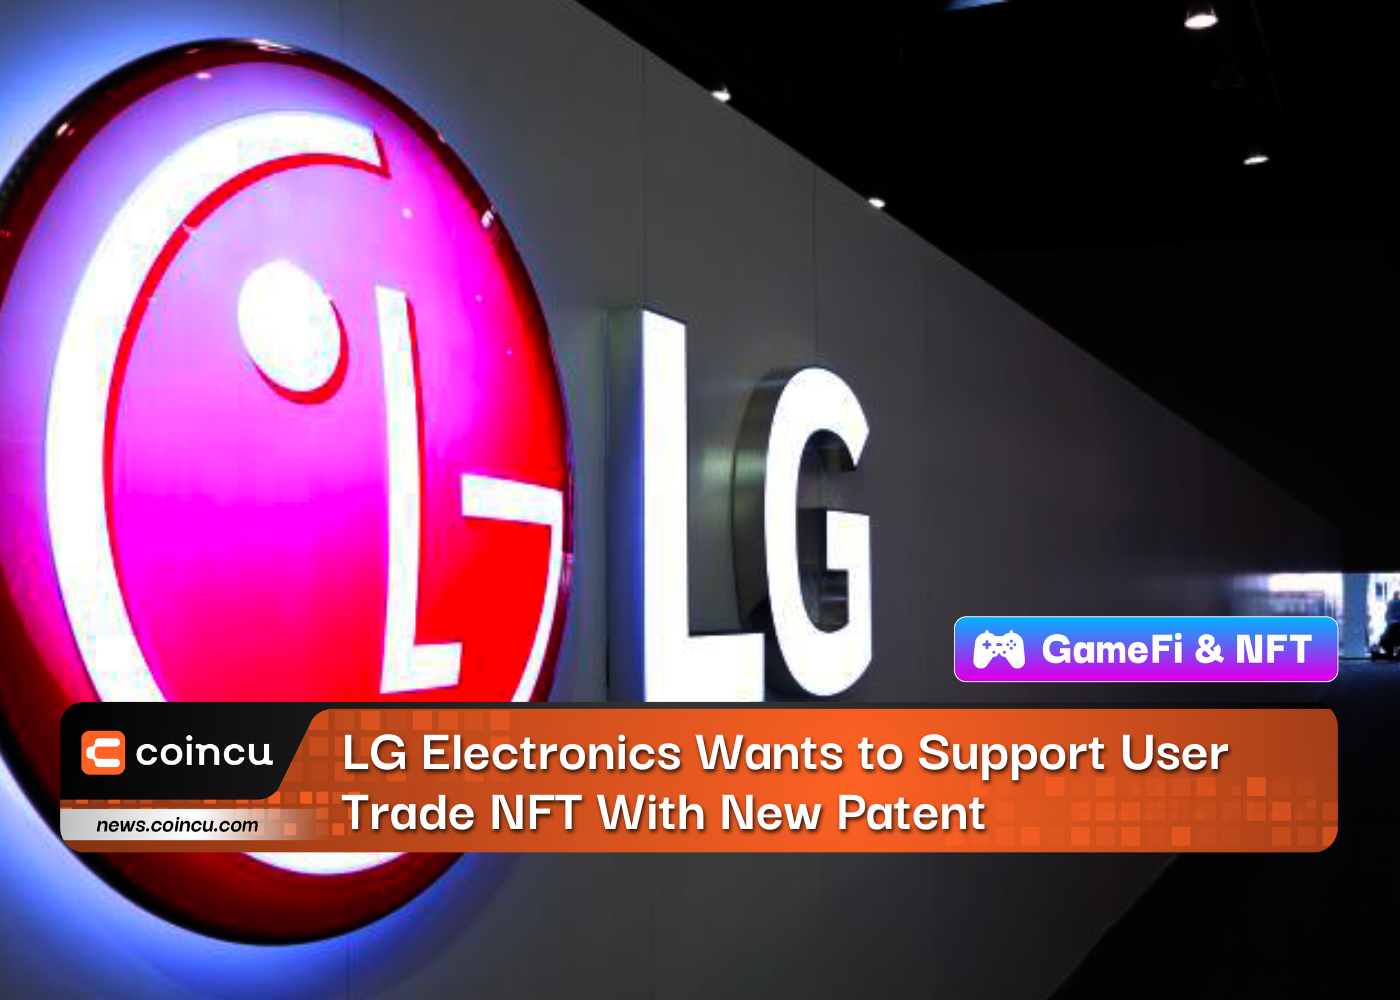 LG Electronics Wants to Support User Trade NFT With New Patent